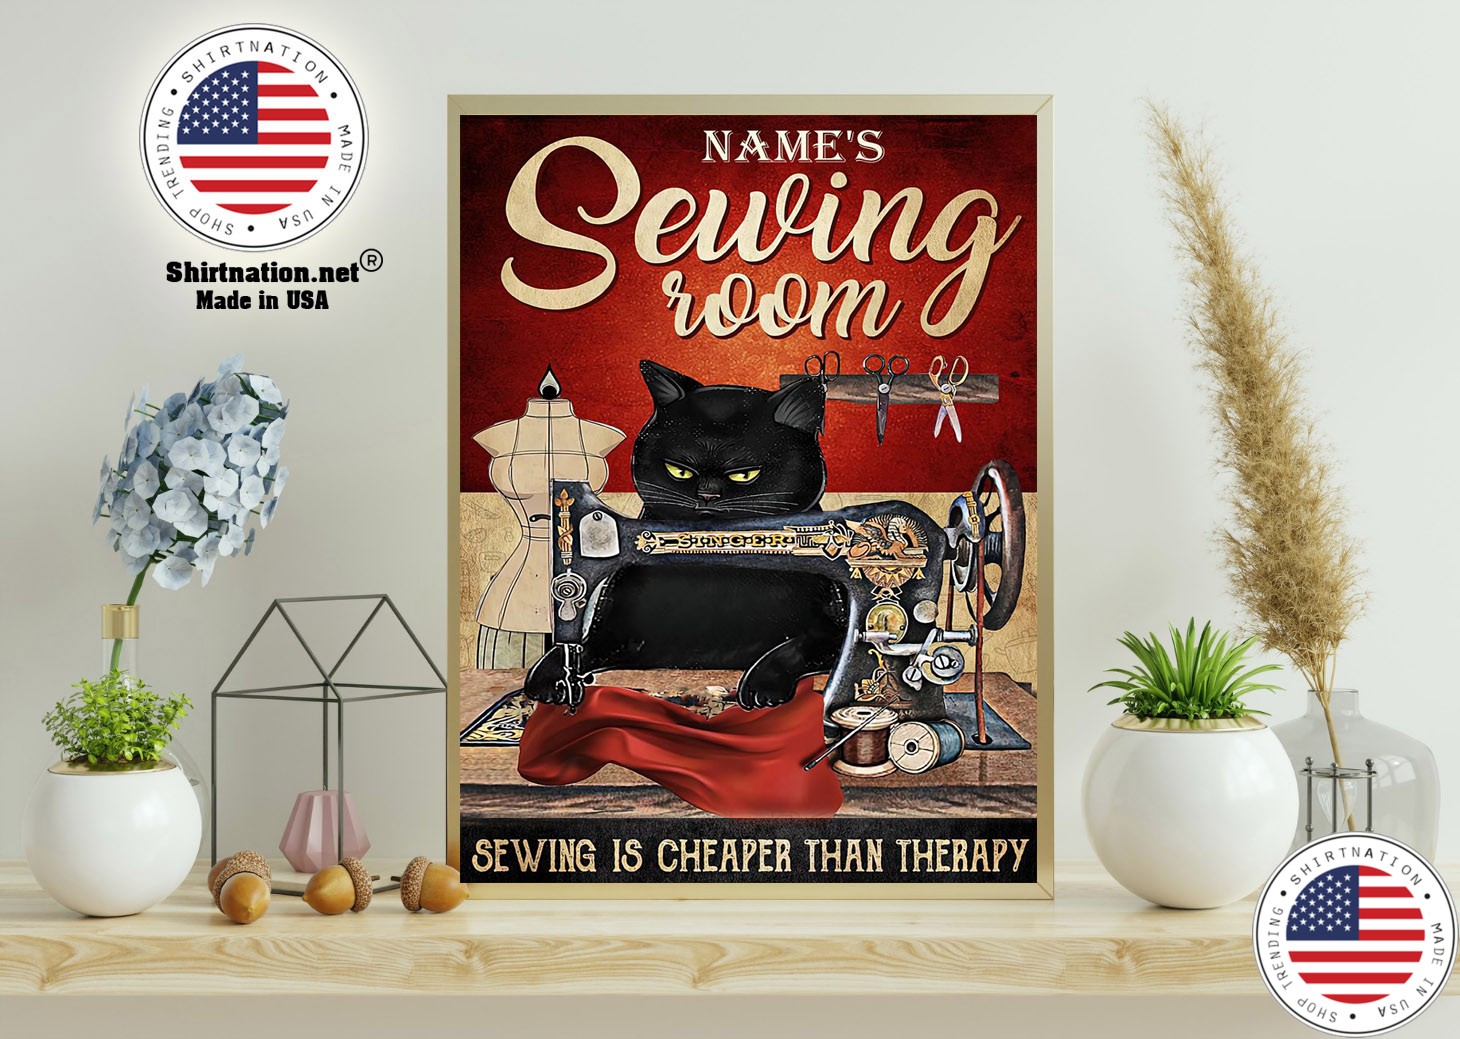 Sewing room sewing is cheaper than therapy poster 11